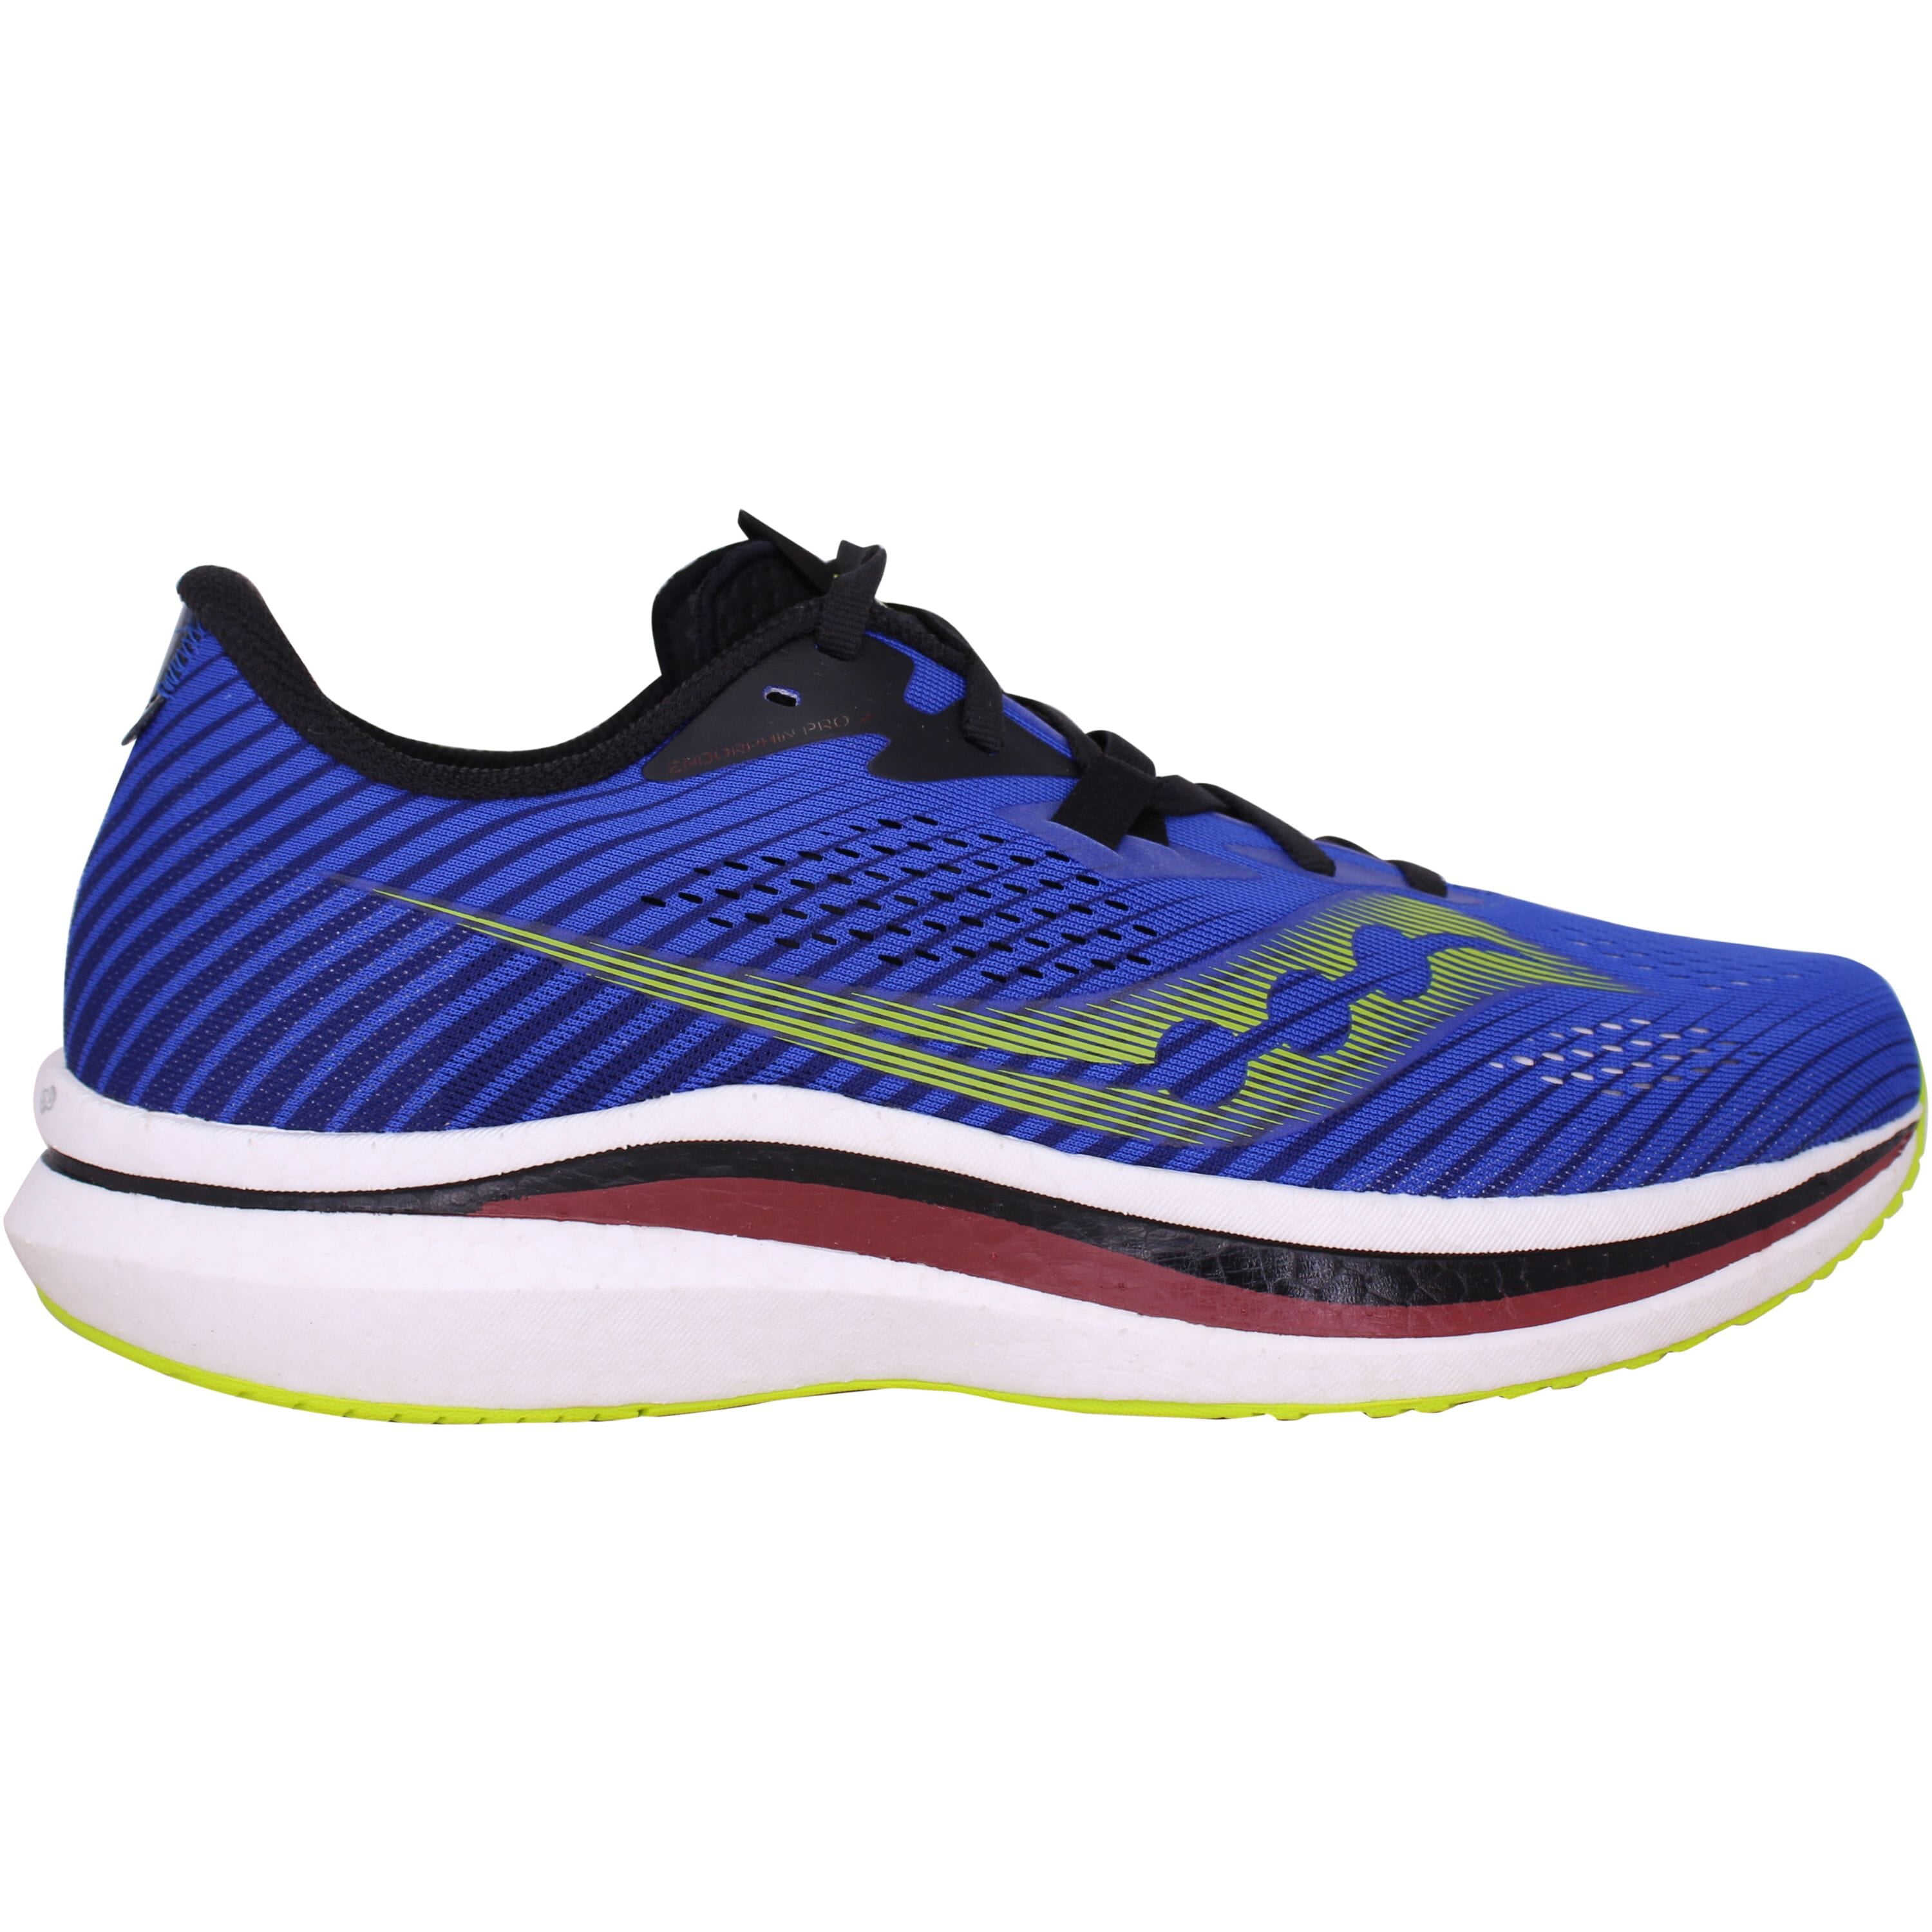 Saucony Mens Endorphin Pro 2 Lightweight Fitness Running Shoes